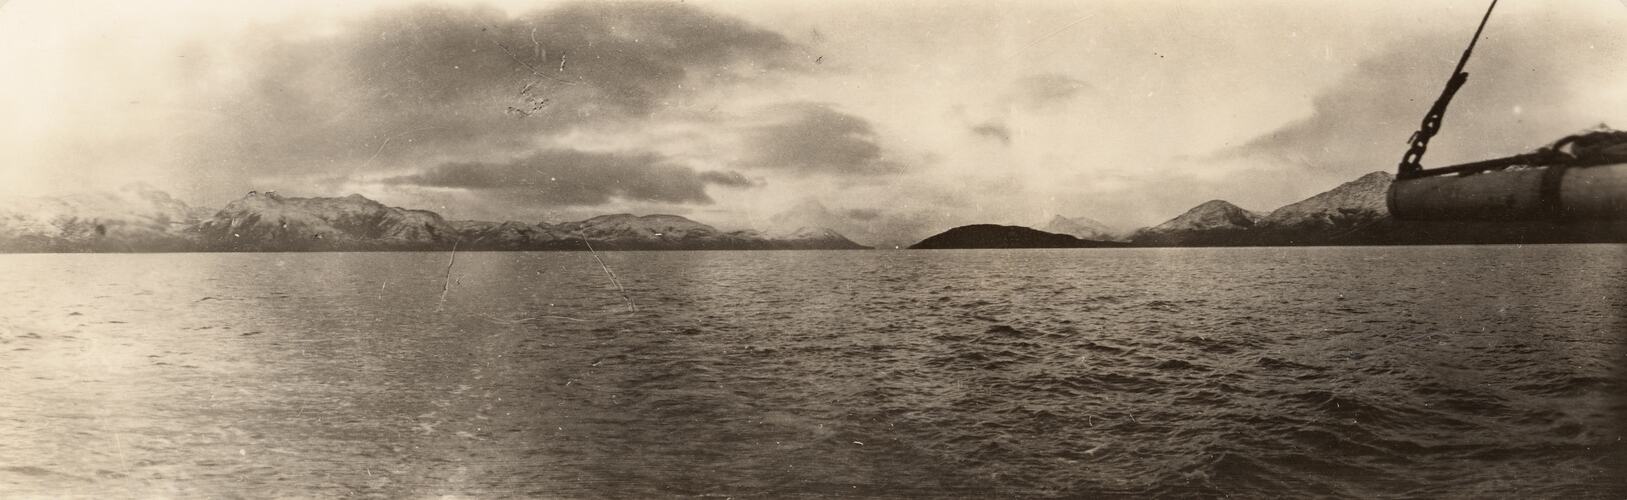 View of Beagle Channel taken aboard the 'Fortunato Viego', taken 7th May 1929